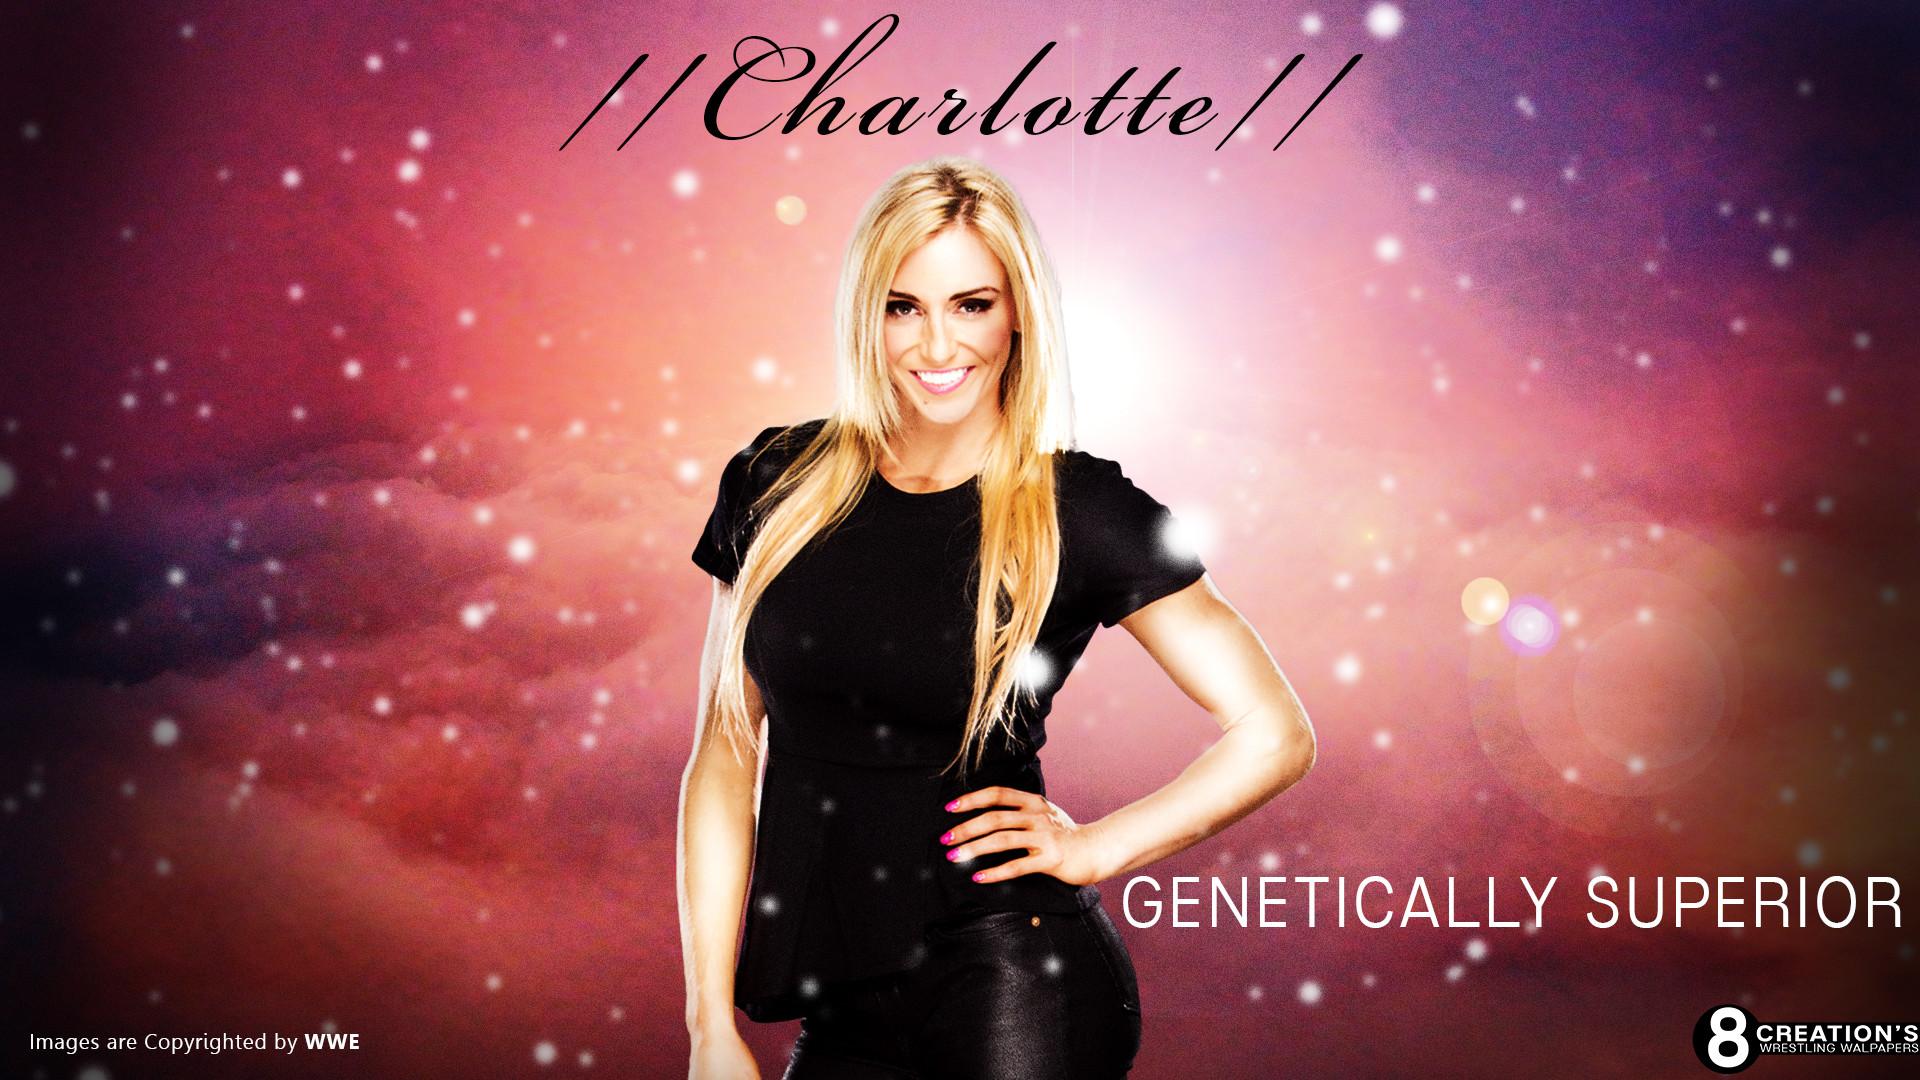 Download Eula2003 Images Wwe Charlotte Flair Hd Wallpaper And  Wwe Divas  Charlotte Hd PNG Image with No Background  PNGkeycom